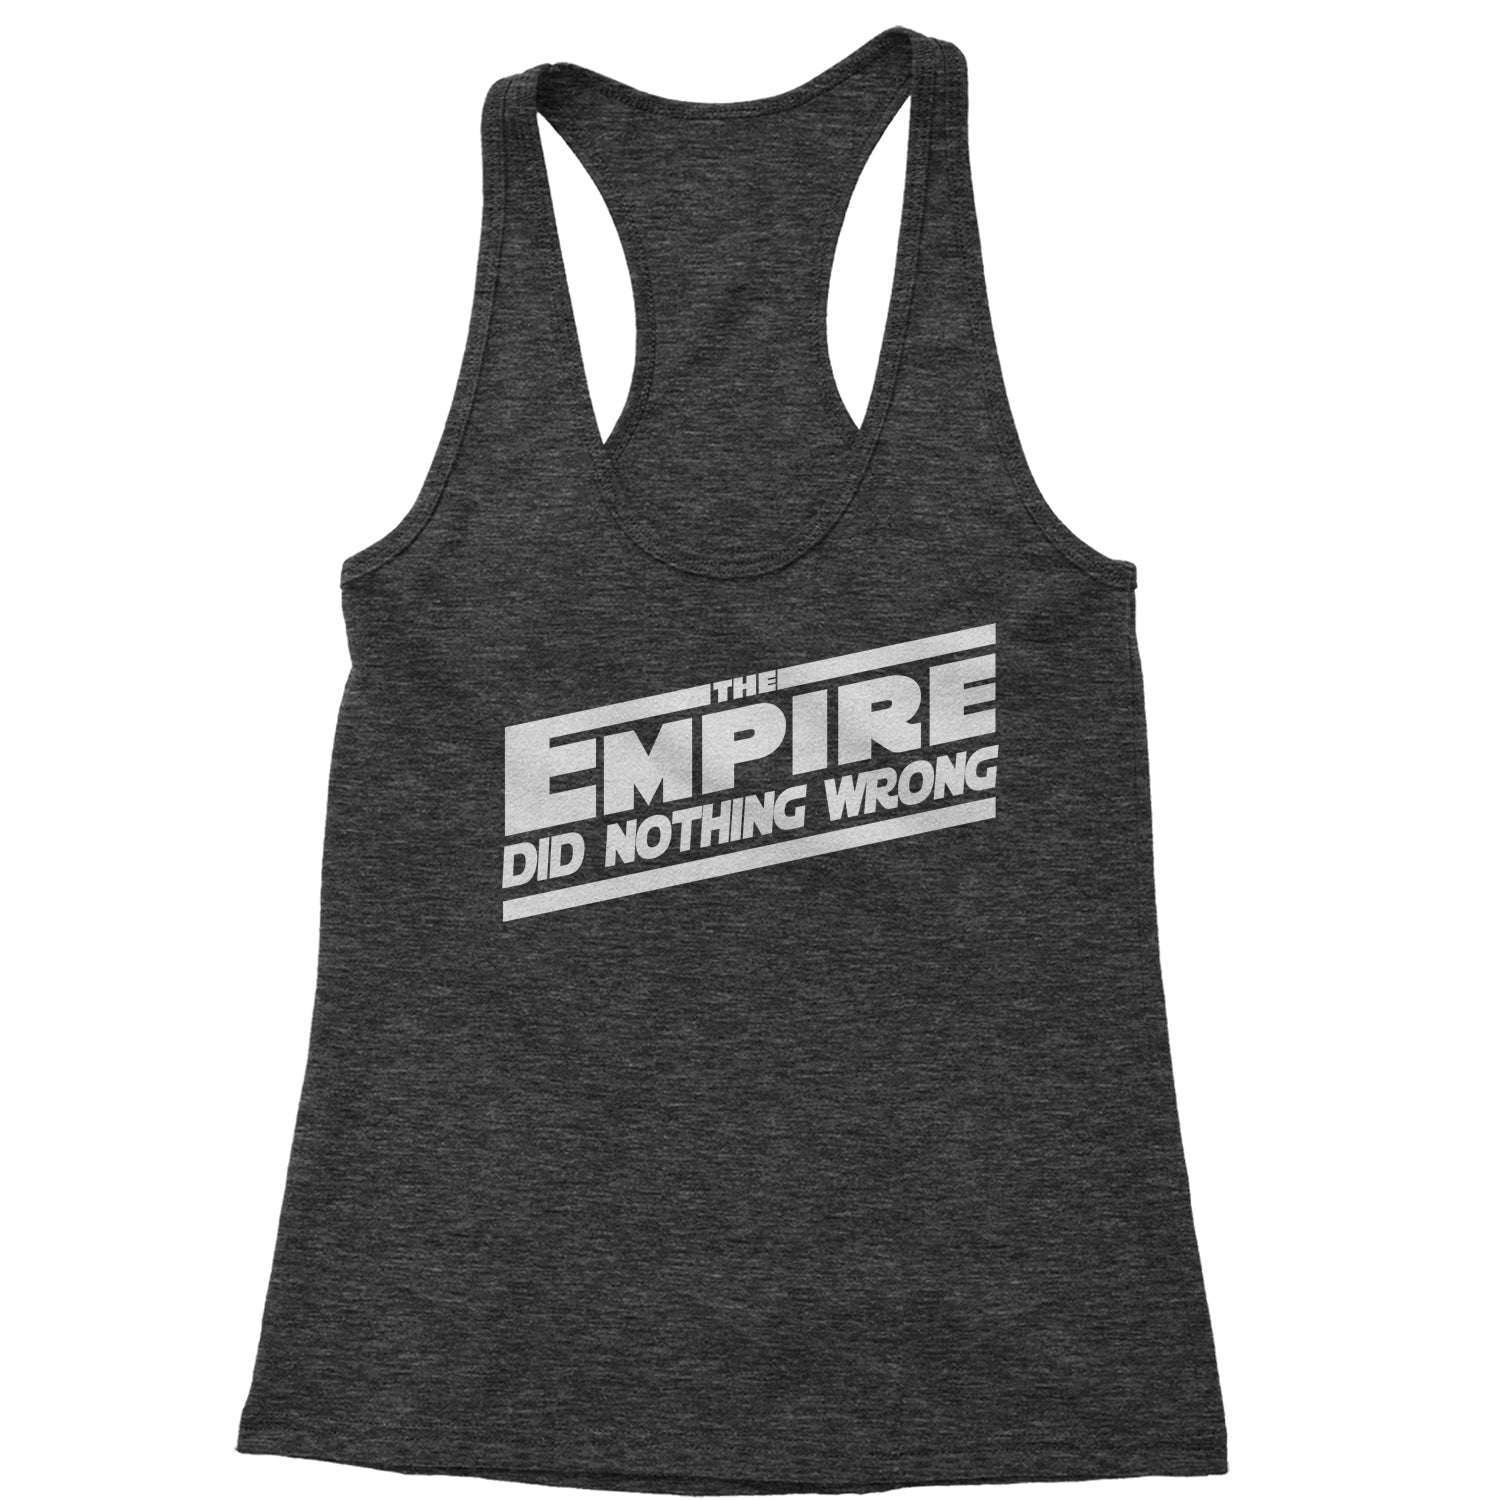 The Empire Did Nothing Wrong Racerback Tank Top for Women rebel, reddit, space, star, storm, subreddit, tropper, wars by Expression Tees